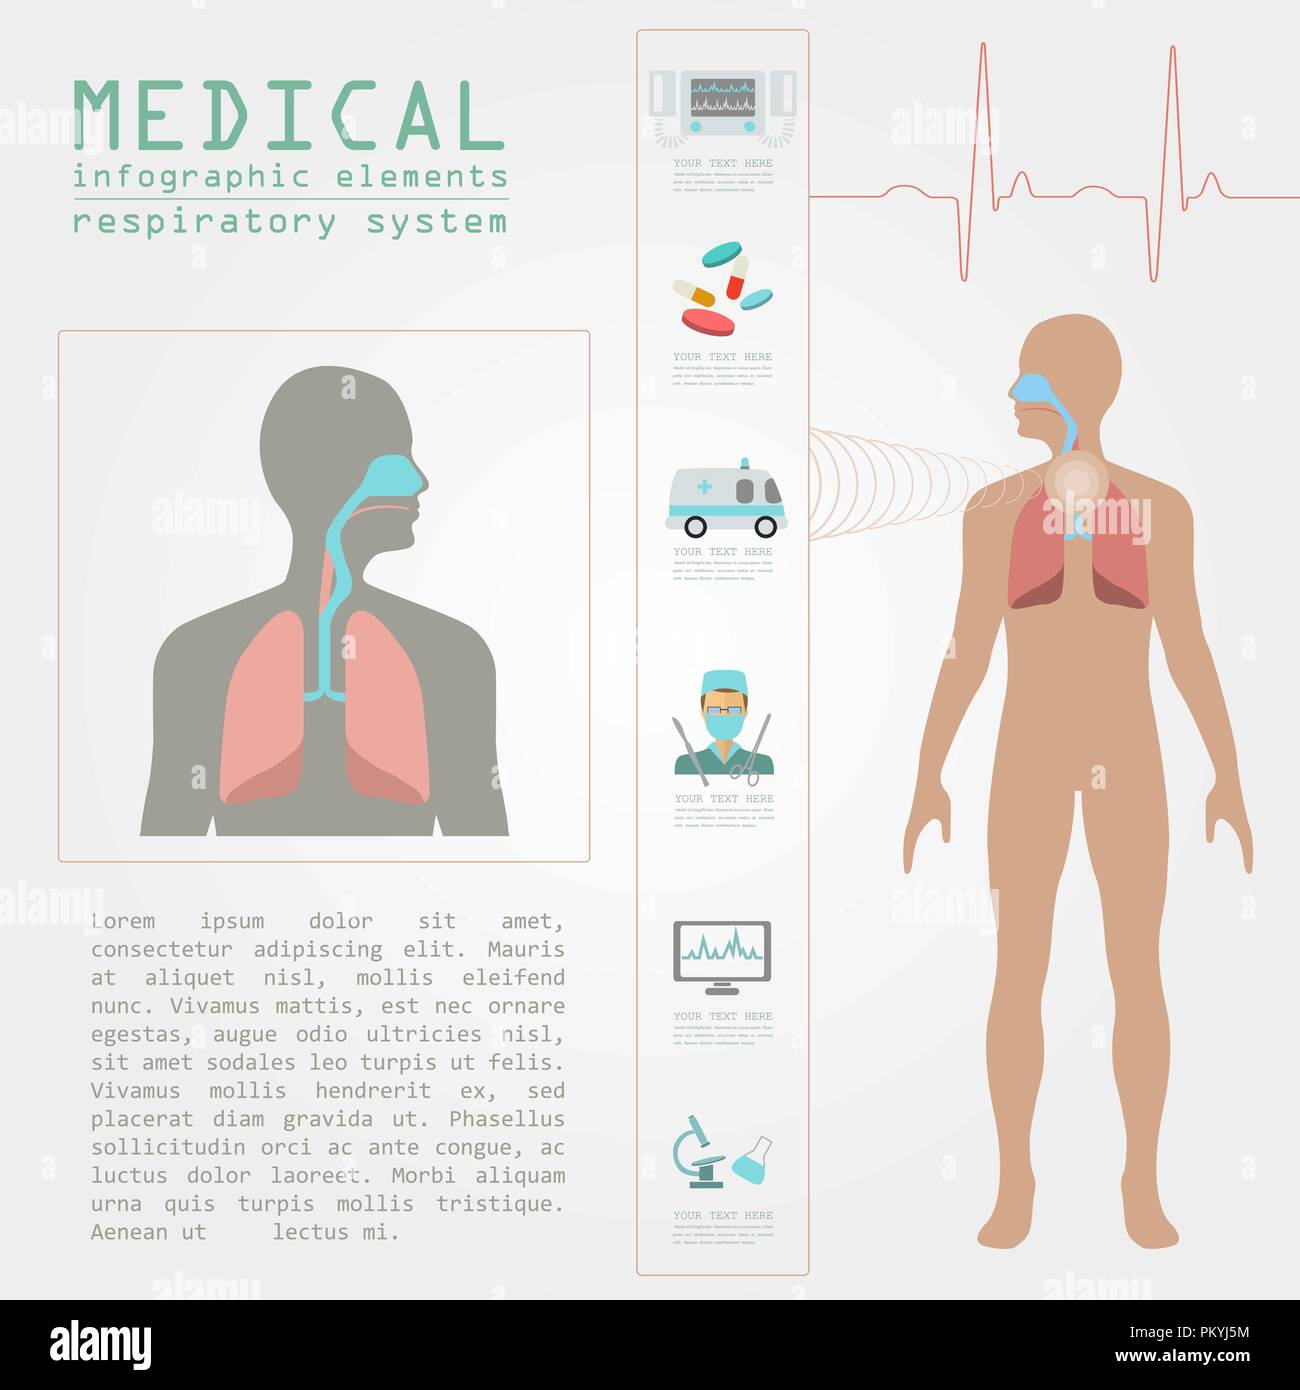 Medical and healthcare infographic, respiratory system infographics. Vector illustration Stock Vector